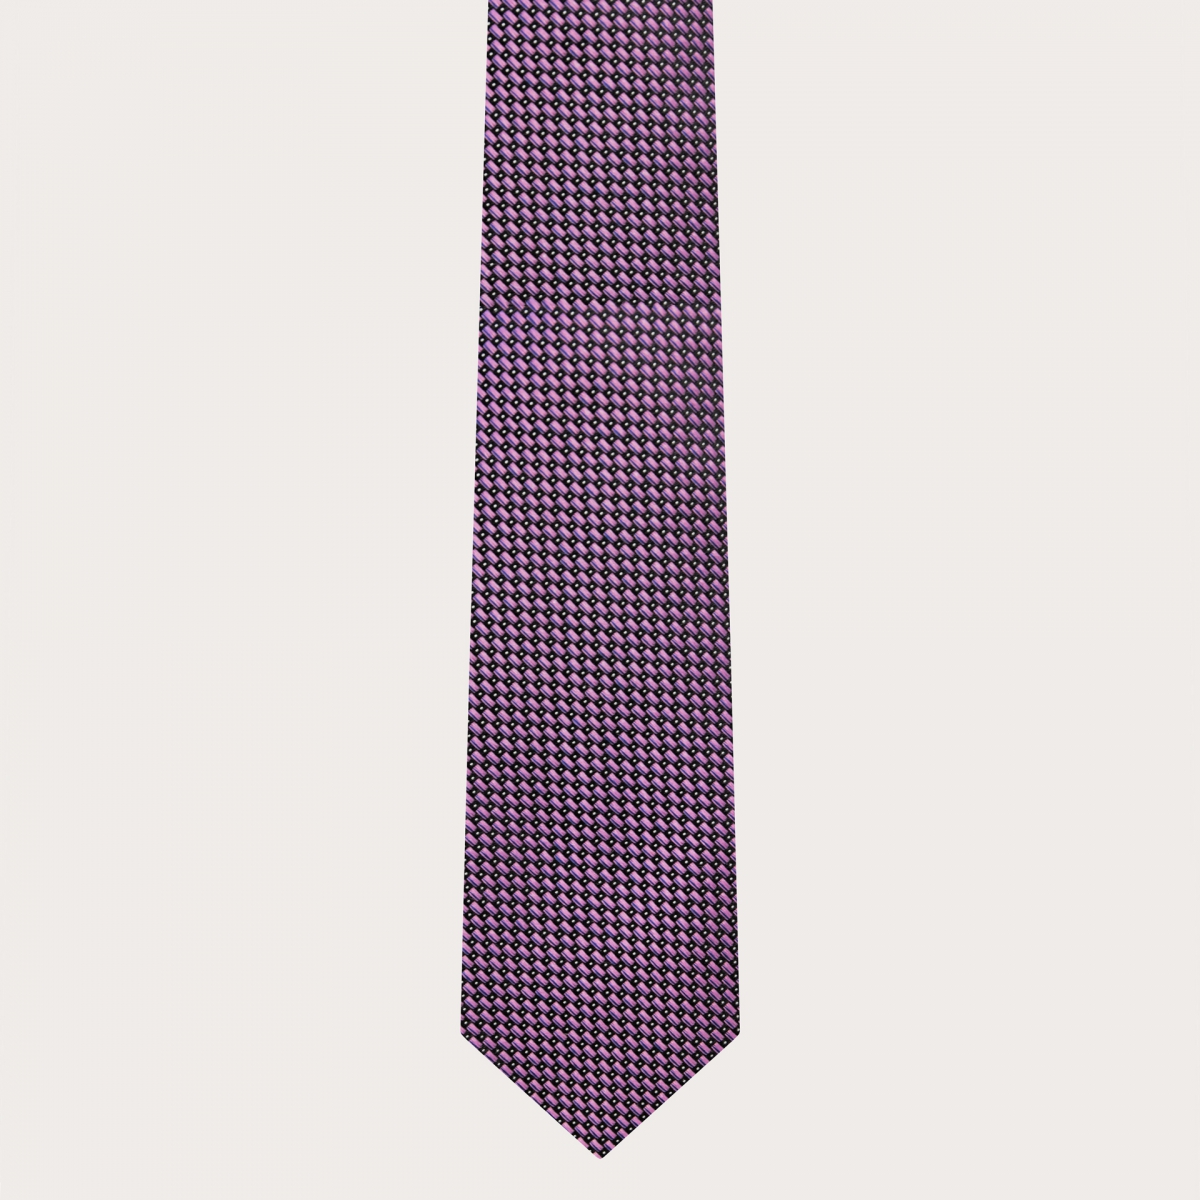 BRUCLE Dotted pattern pink set of necktie and pocket square